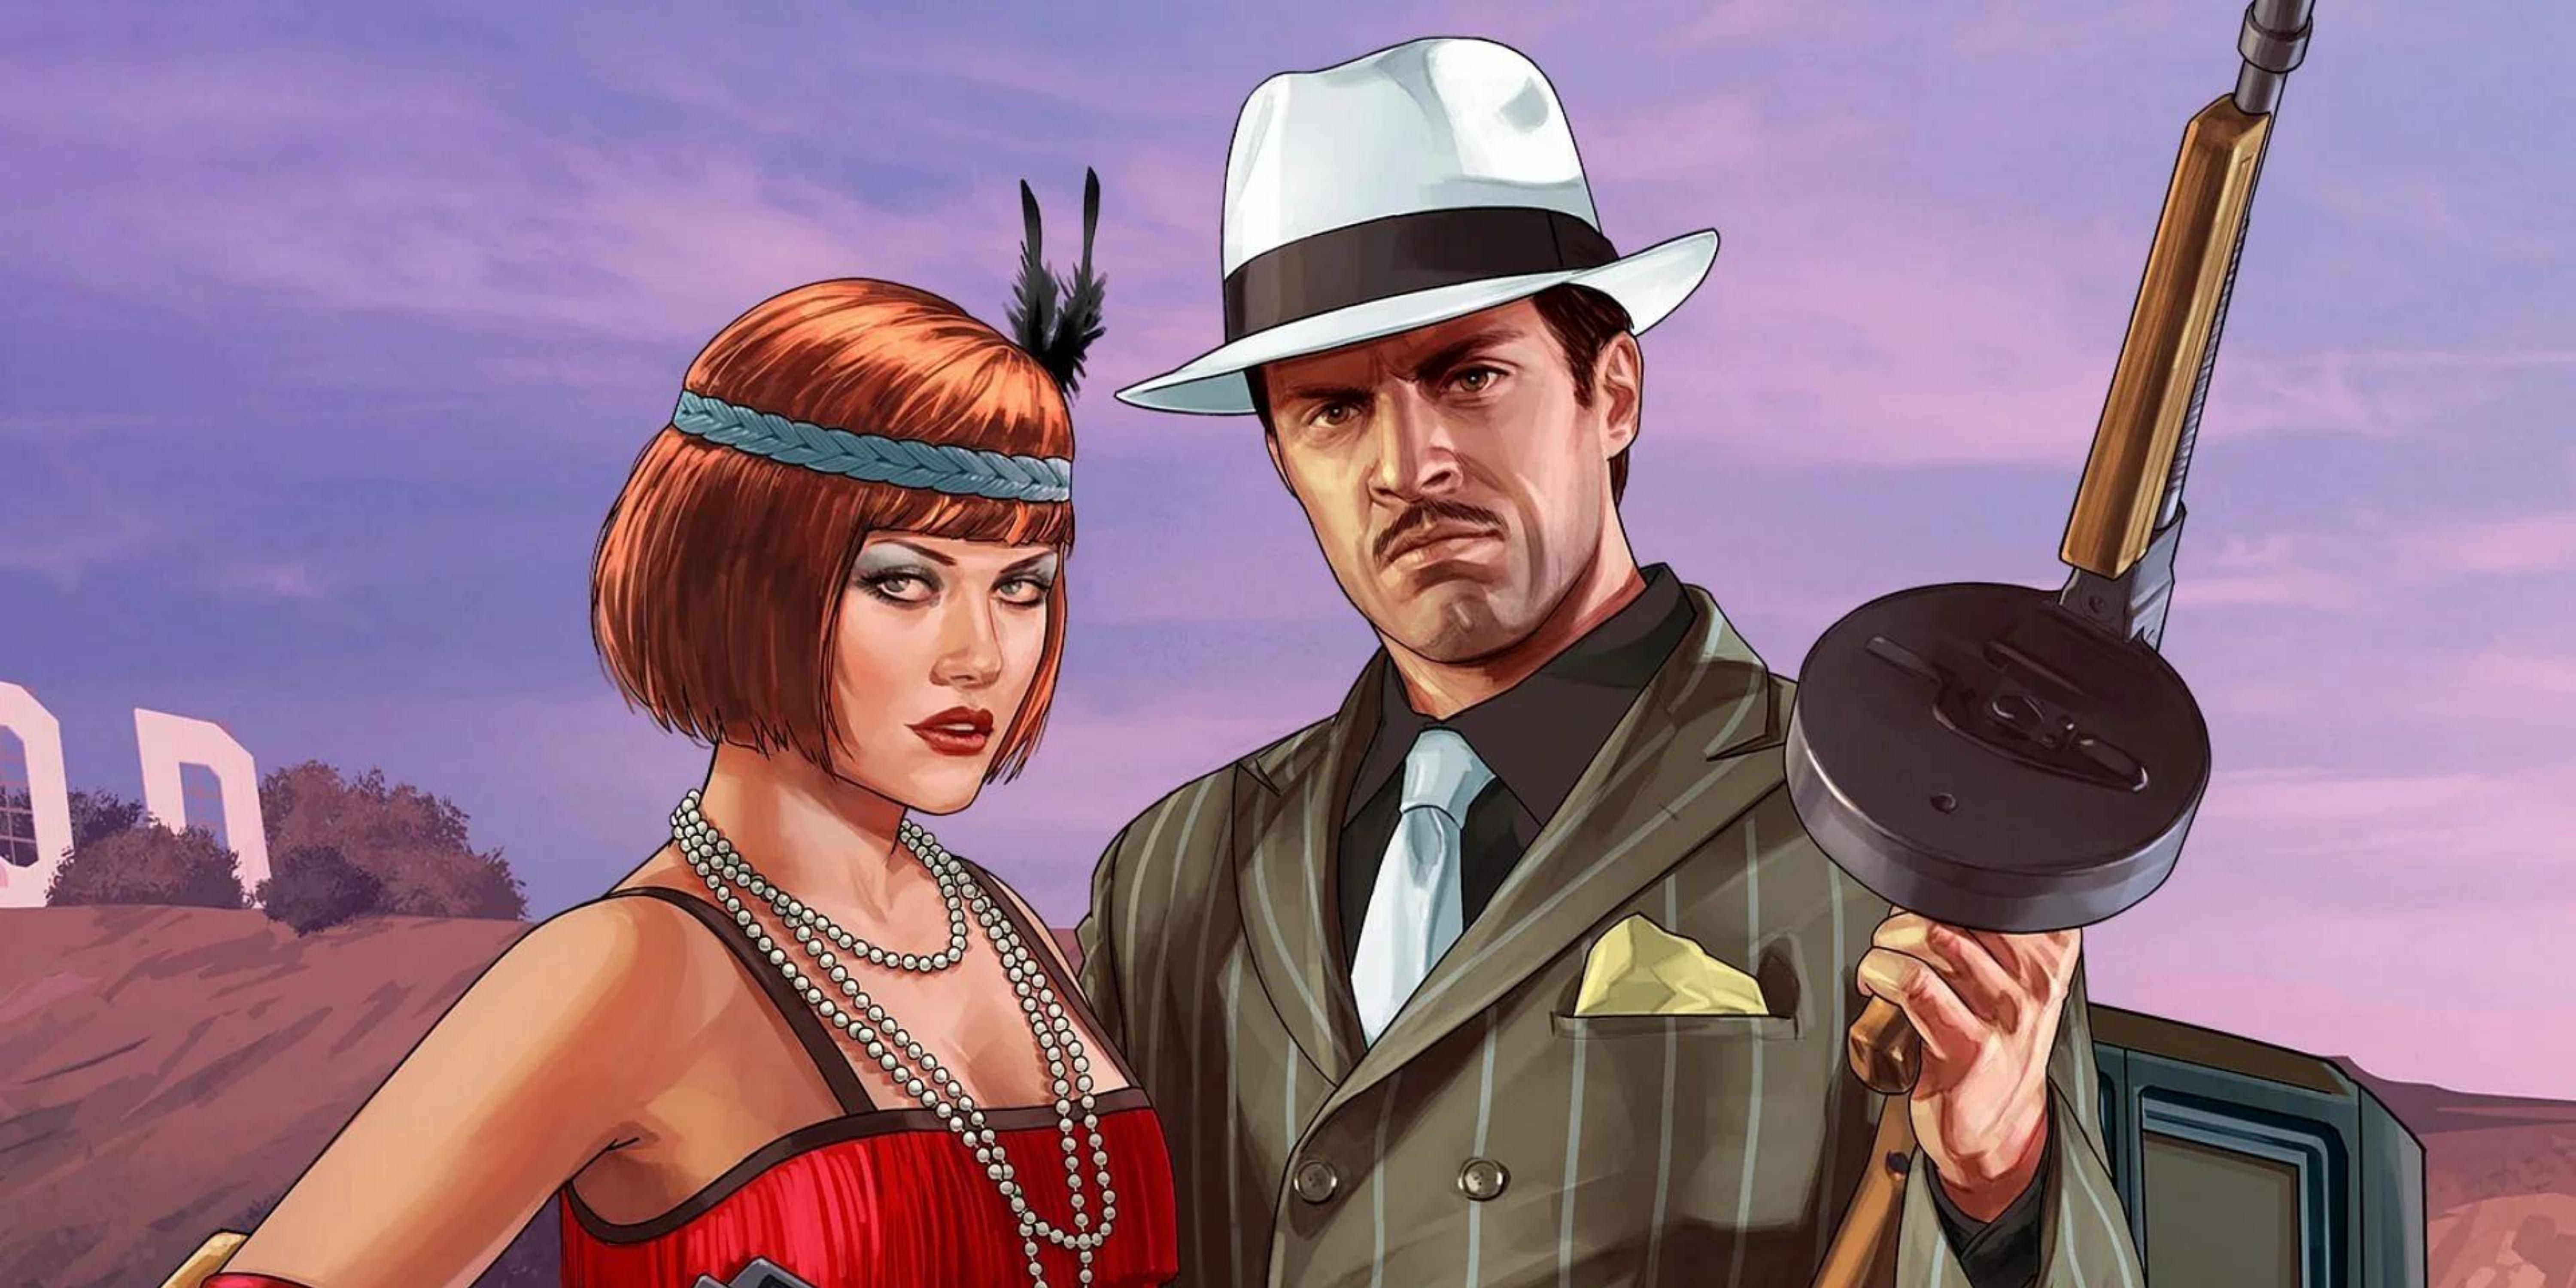 Reports claim GTA 6's protagonists are inspired by outlaw couple Bonnie and Clyde.